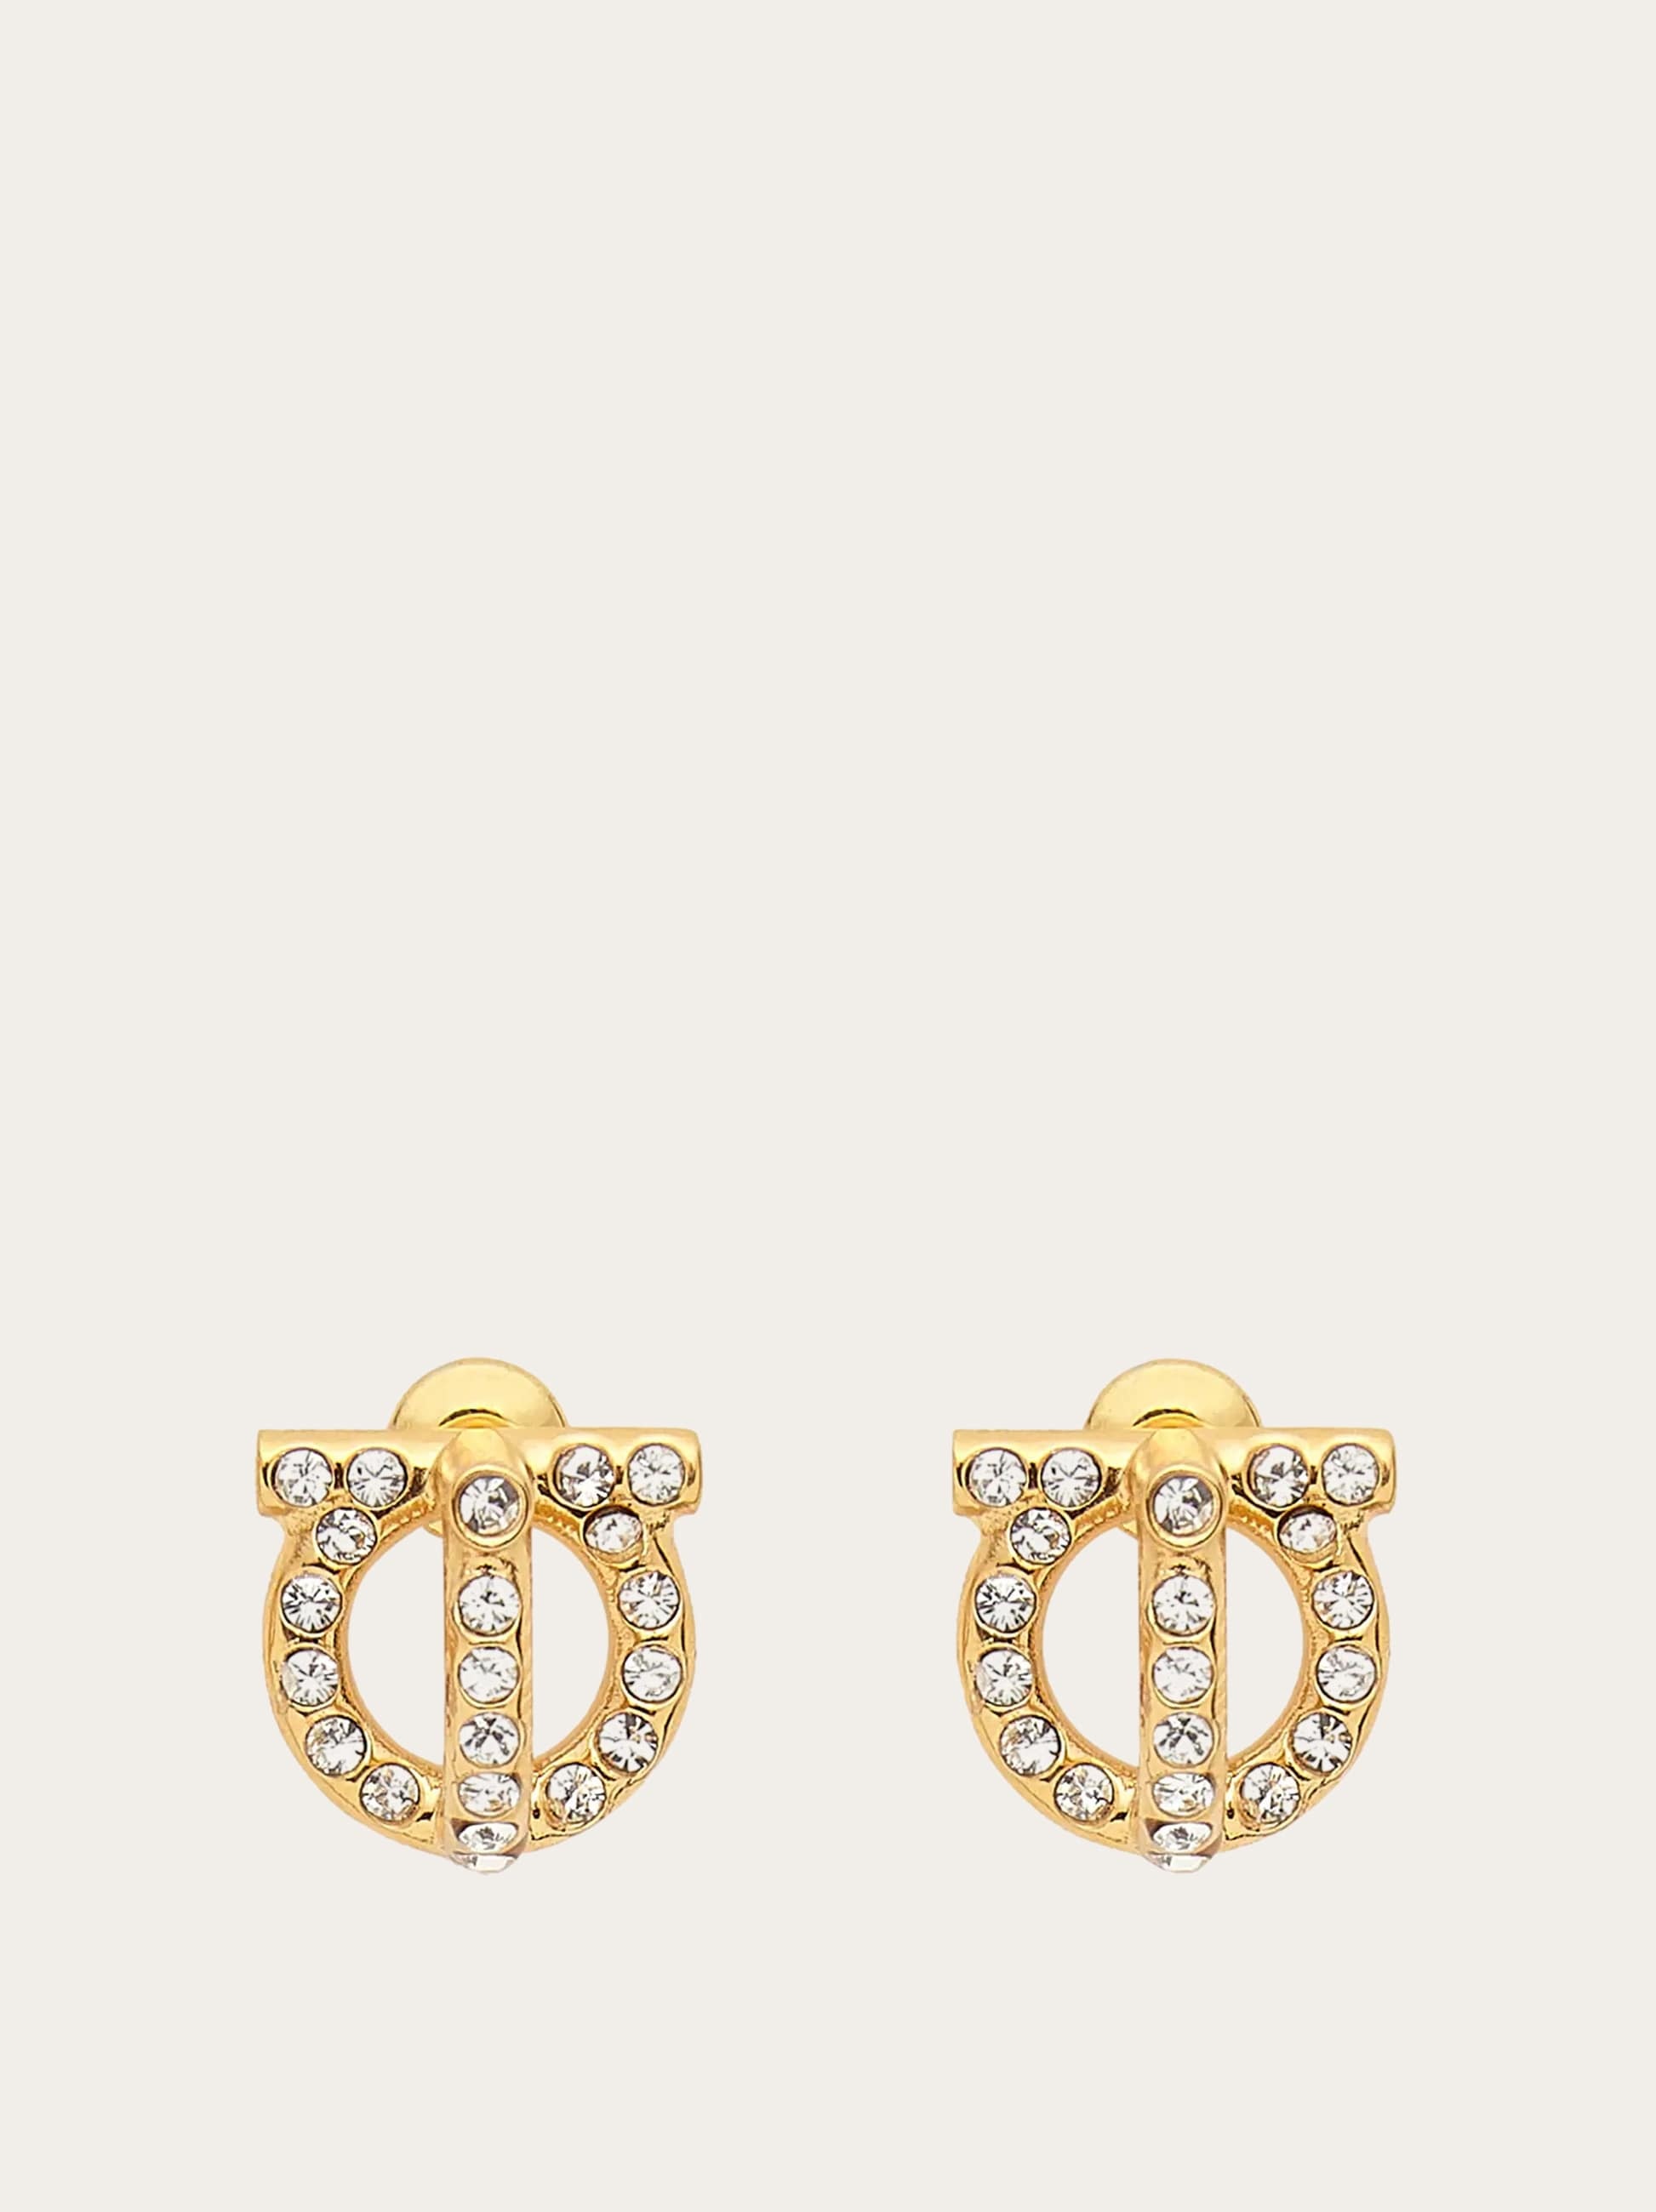 Gancini 3D earrings with crystals - 1